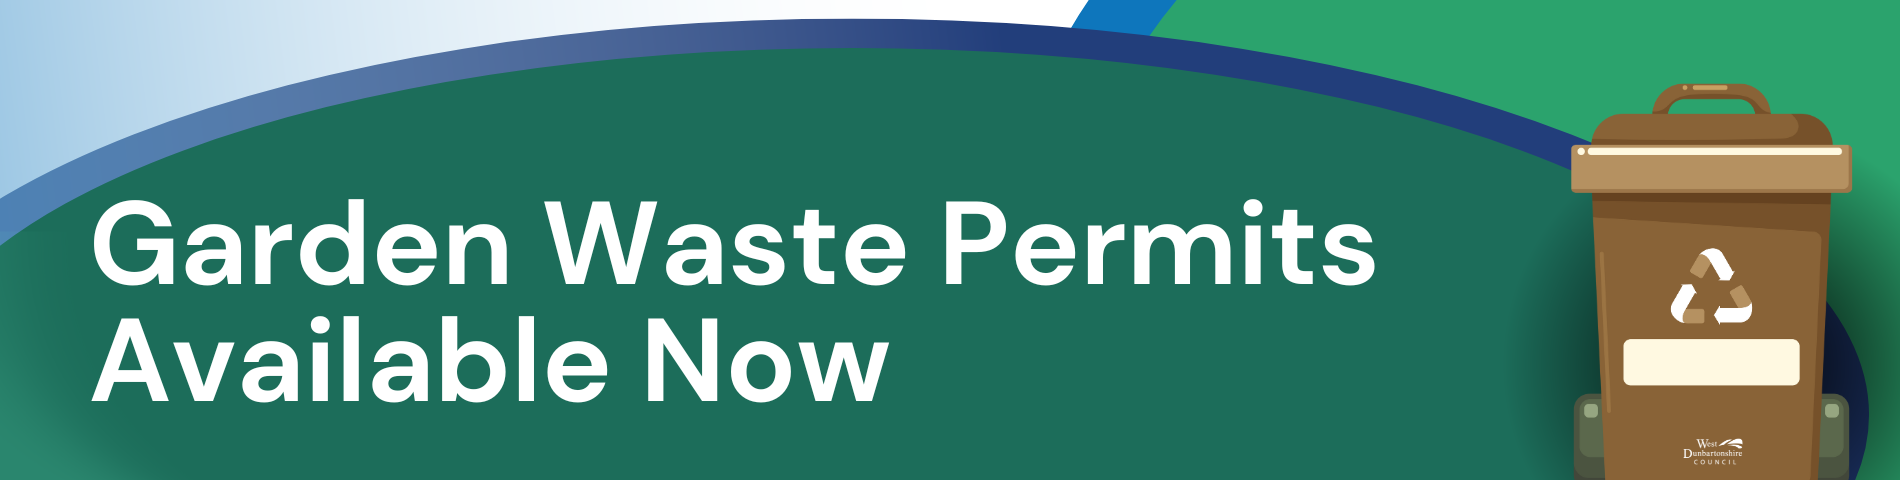 Garden Waste Permits Available Now